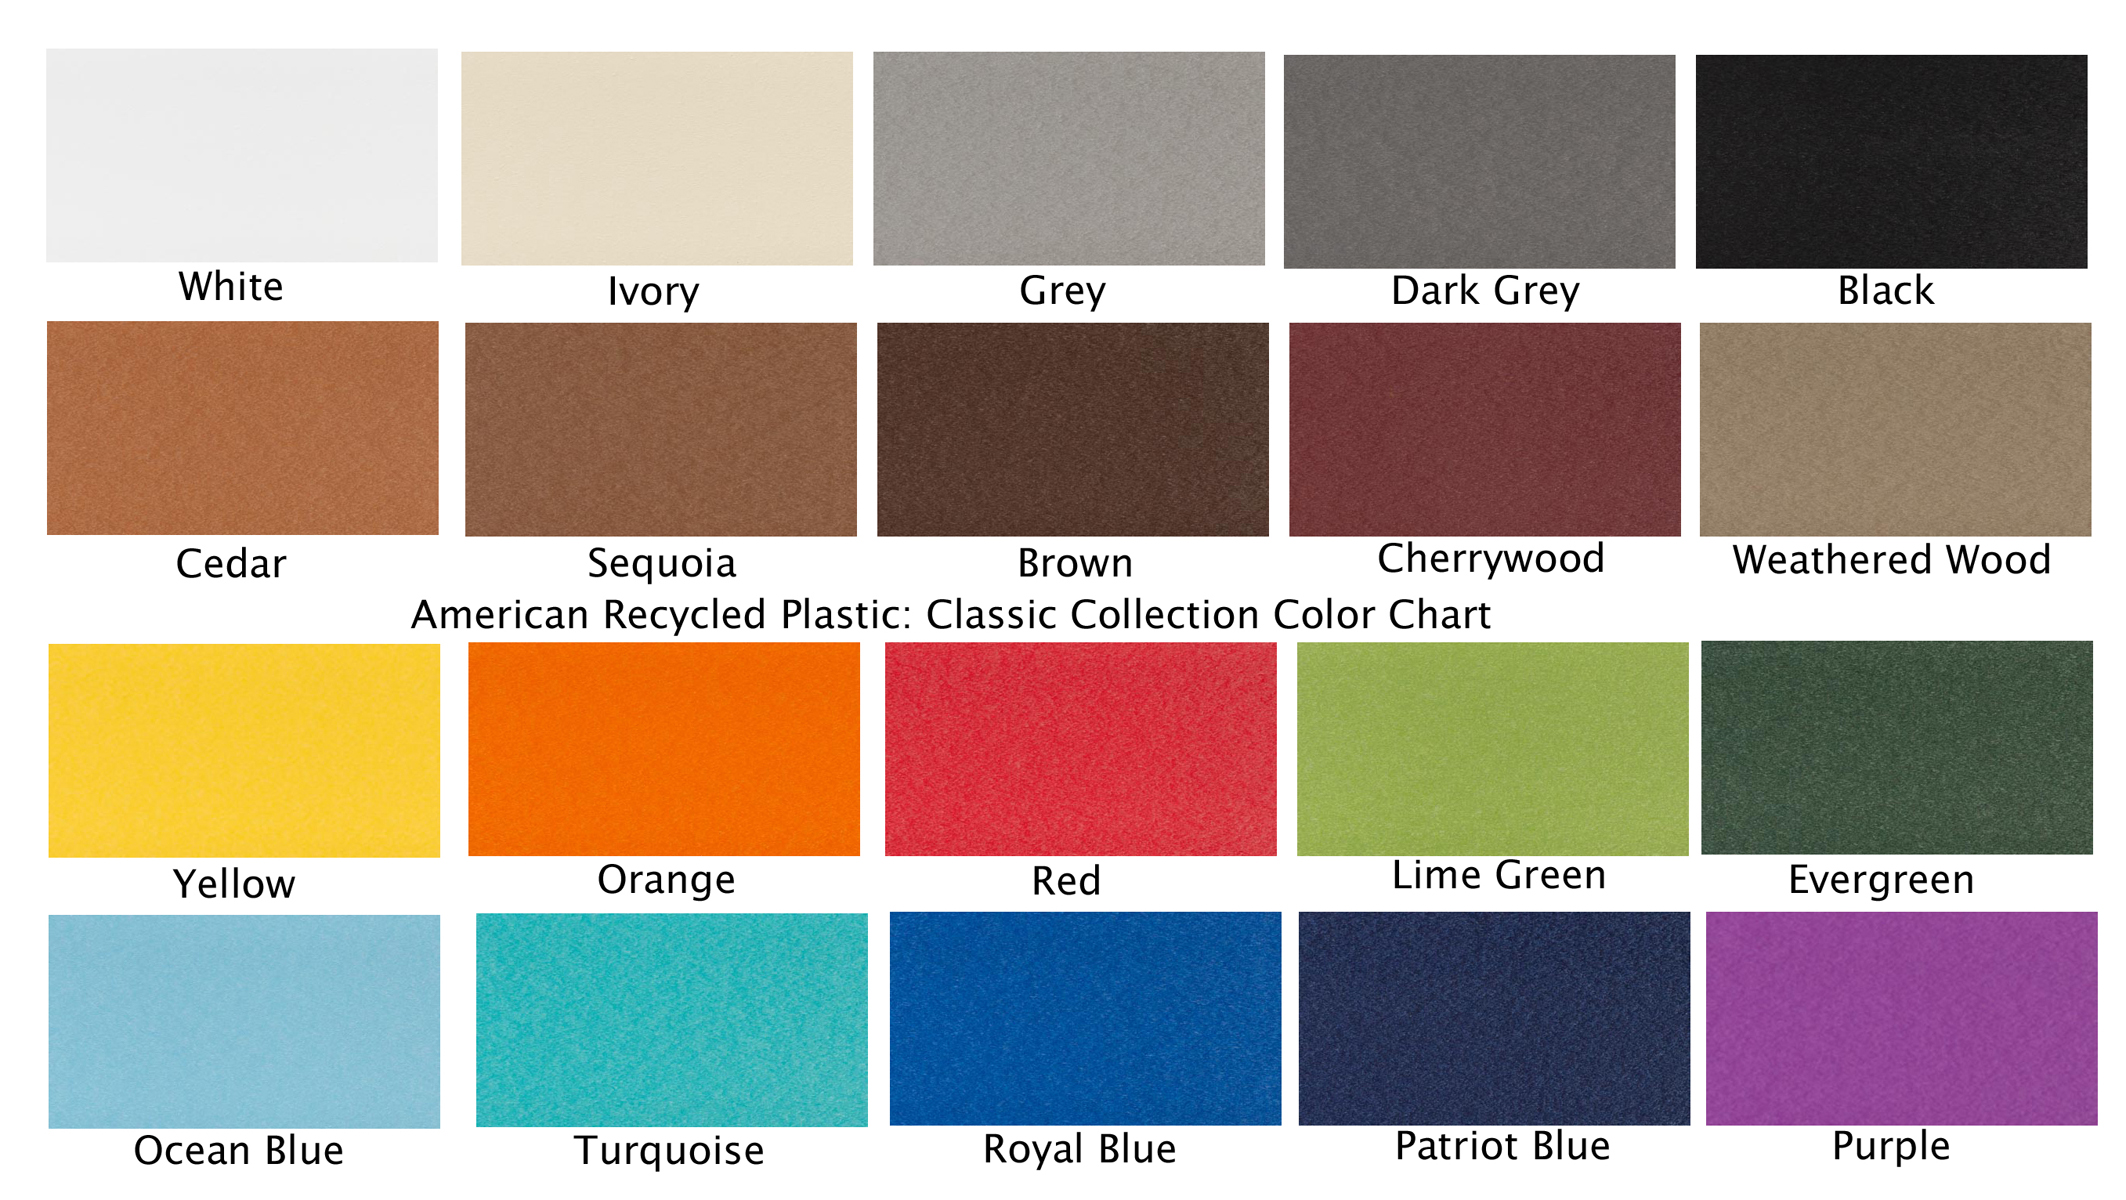 Classic Collection Standard Color chart at American Recycled Plastic